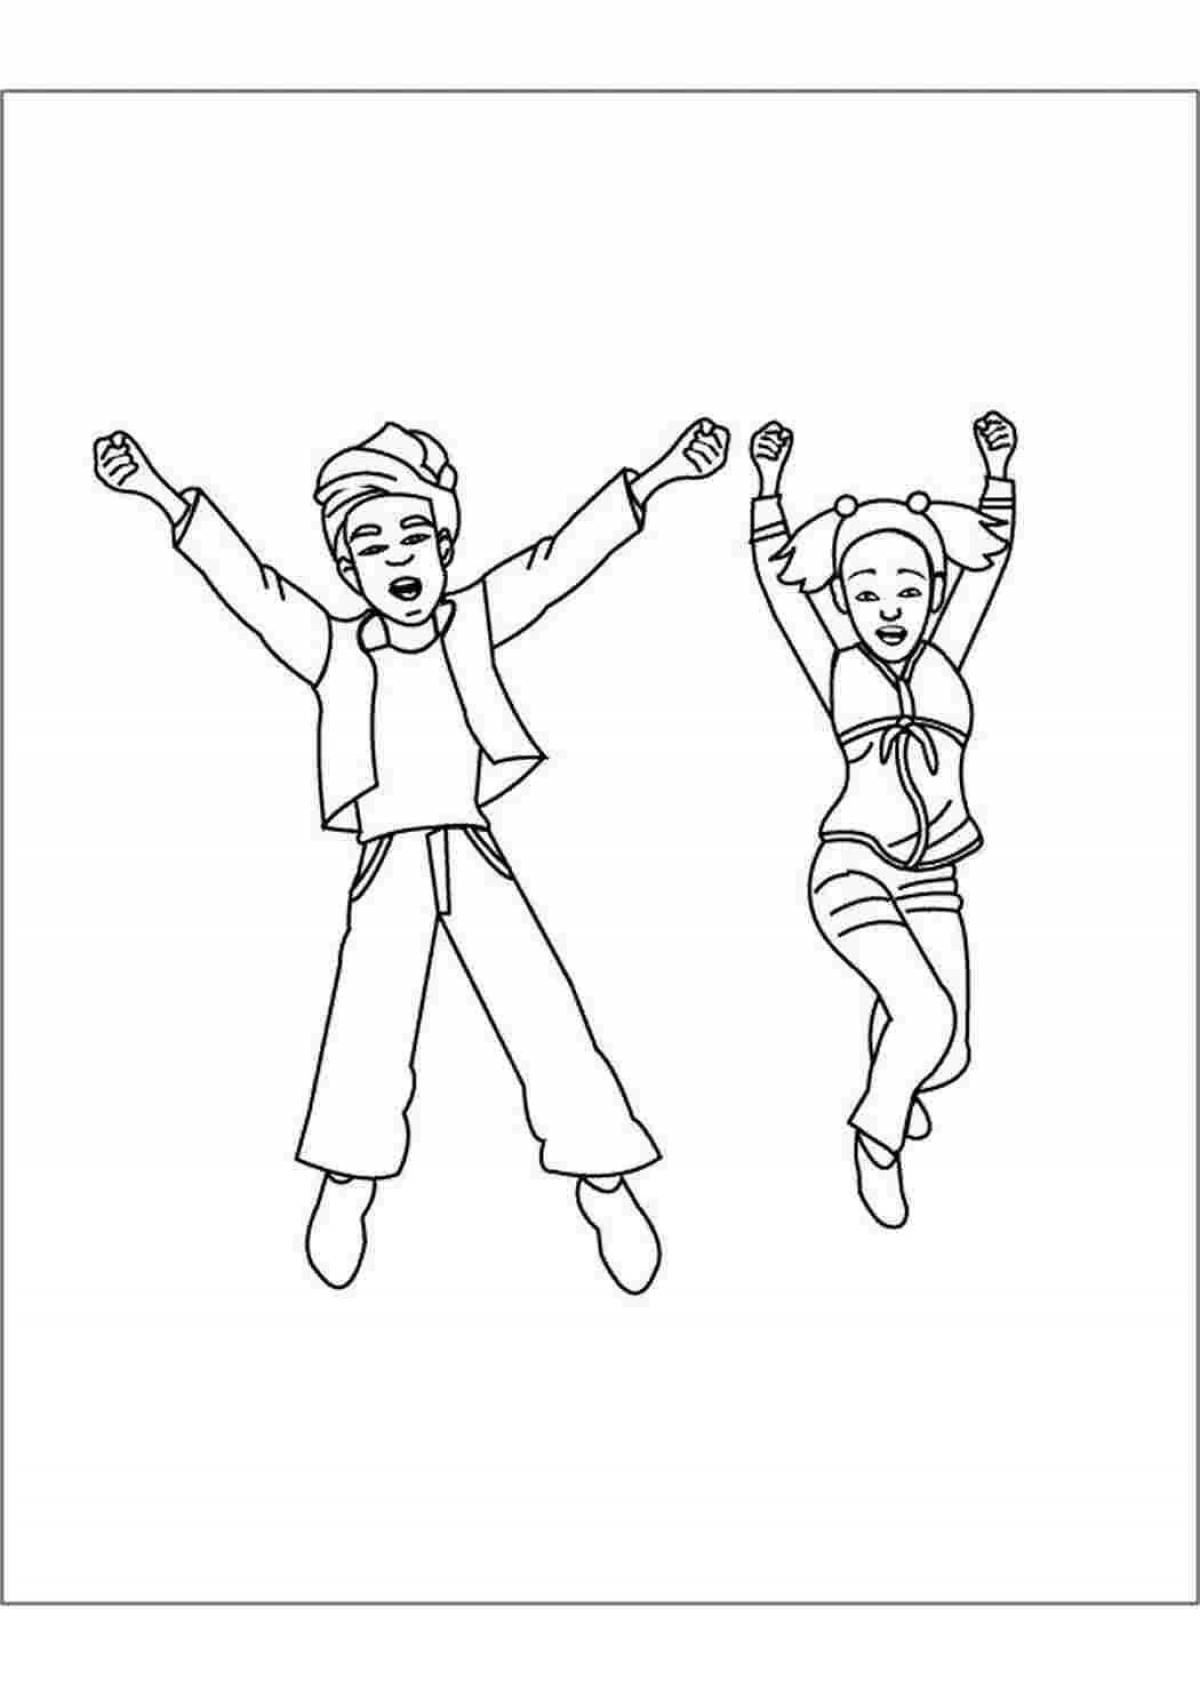 Playful jumping coloring page